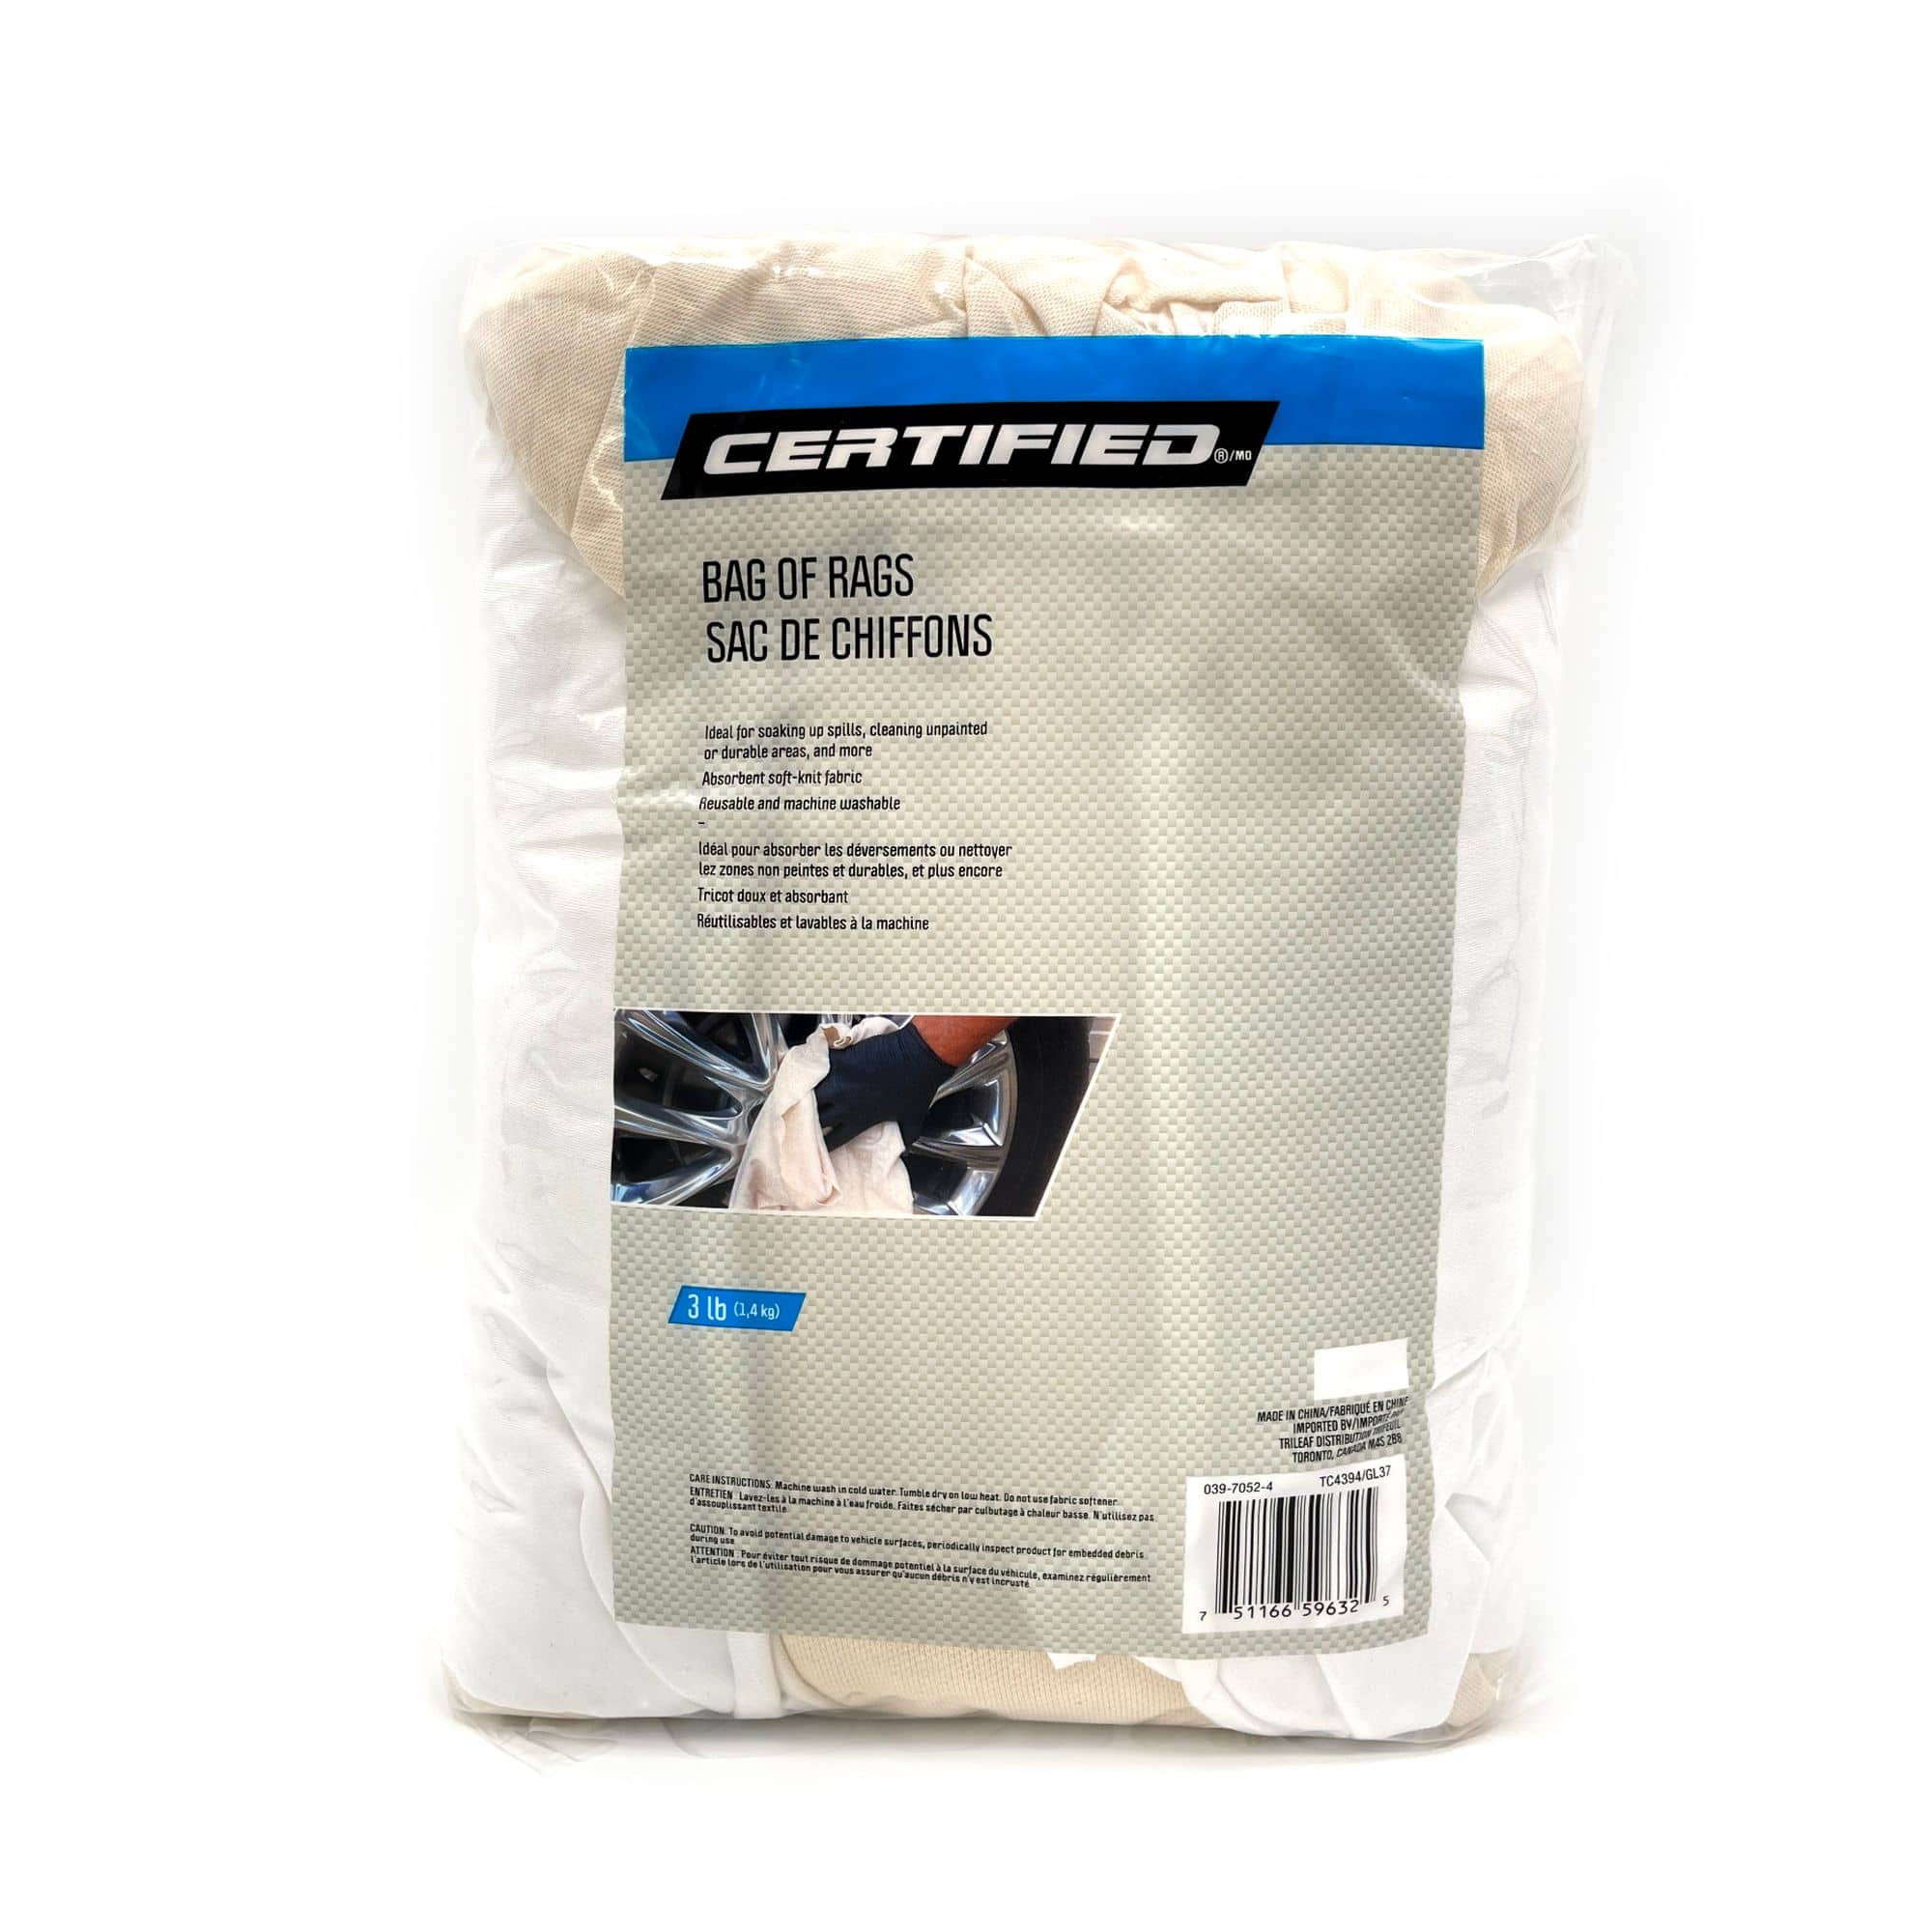 https://media-www.canadiantire.ca/product/automotive/car-care-accessories/auto-cleaning-tools/0397052/certified-3-lb-bag-of-rags-a106cb61-9379-456e-adf0-beb4b9ae58a4-jpgrendition.jpg